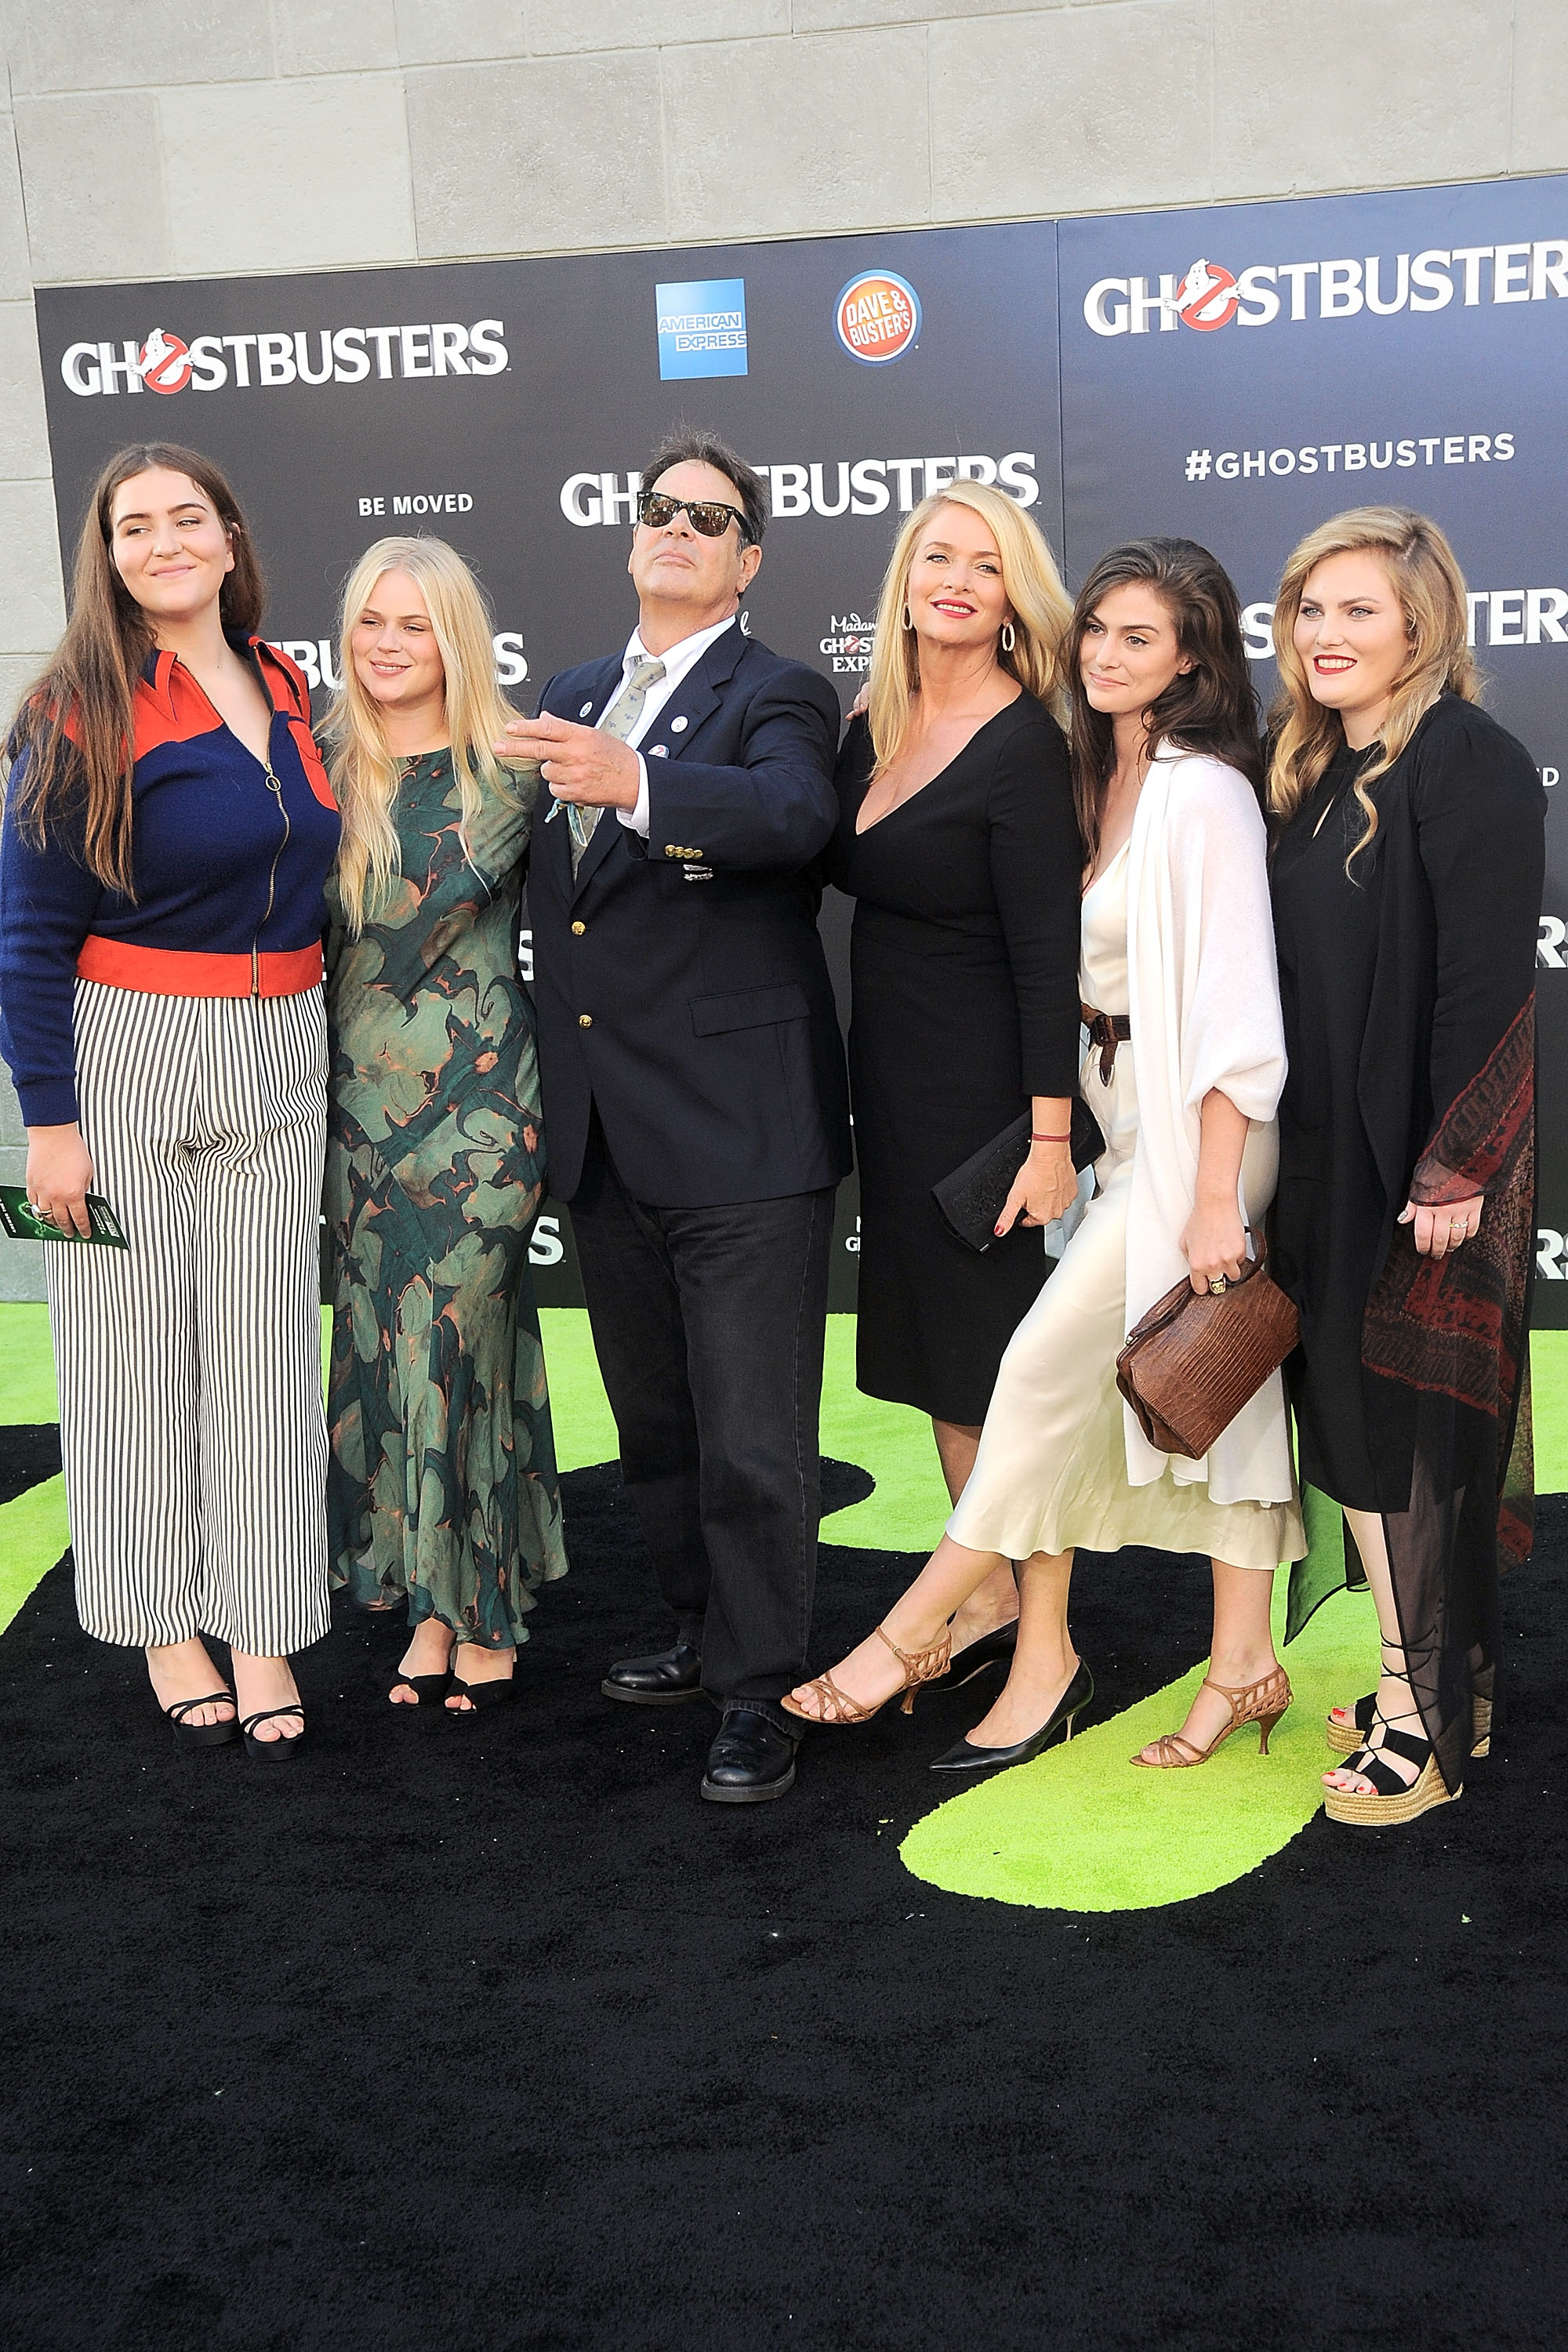 Dan Aykroyd and Donna Dixon with their three daughters at the Ghostbusters: Afterlife premiere in 2016